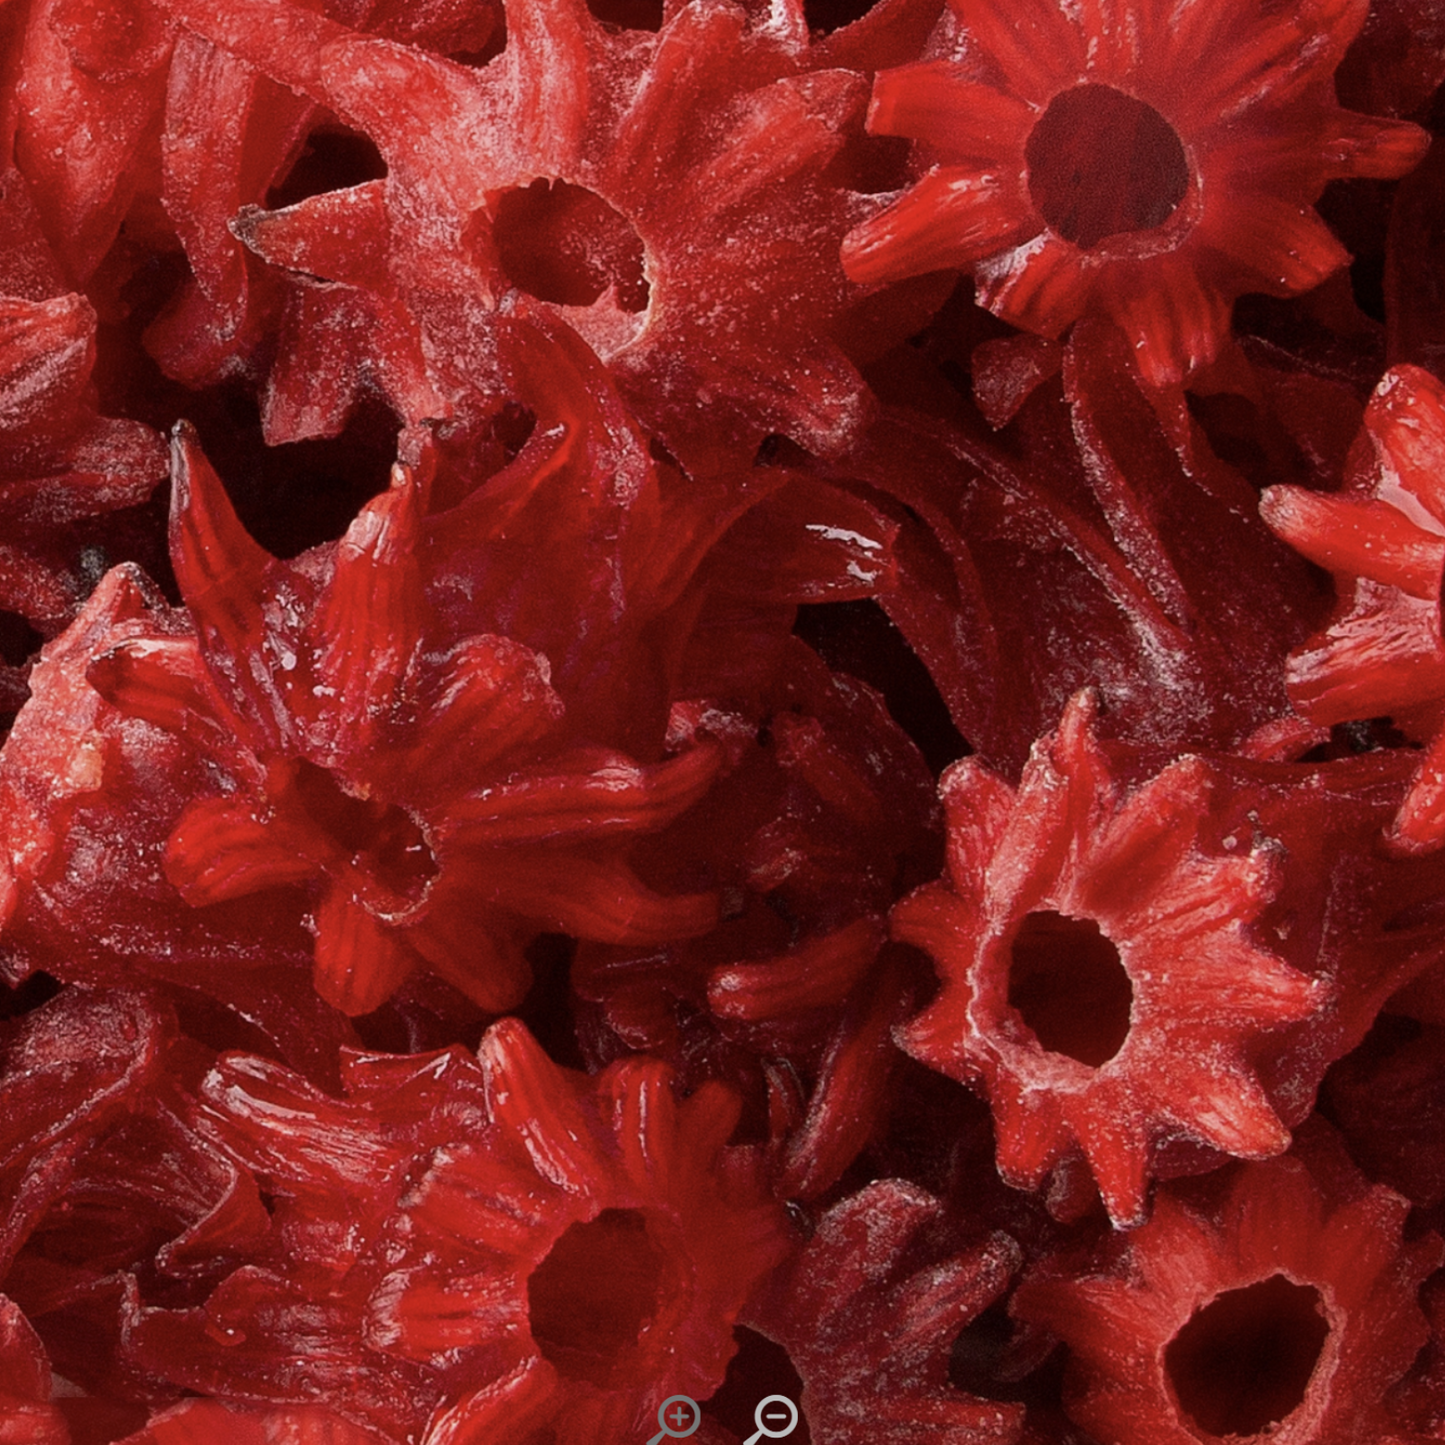 Candy Hibiscus Flowers, Sweet Candy Coated Whole Bright Red Hibiscus Flowers, Addicting Snack!